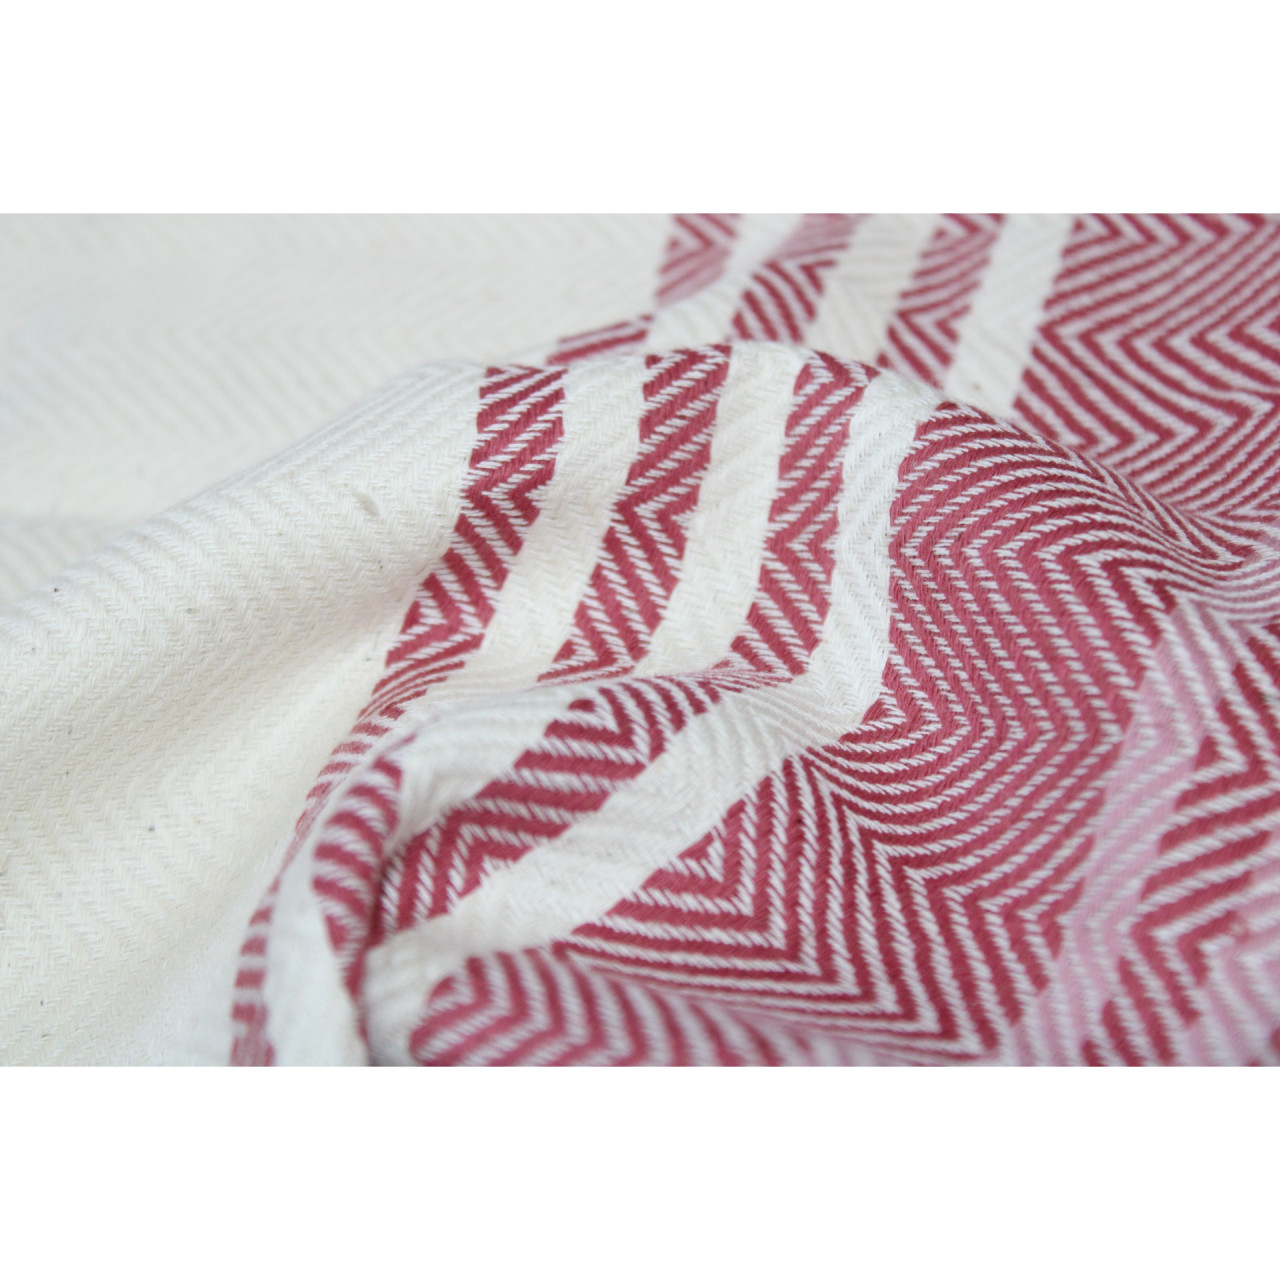 (1436) Cotton and khadi  Azo-free dyed throw from Bihar - White, pink, red, stripes, textured